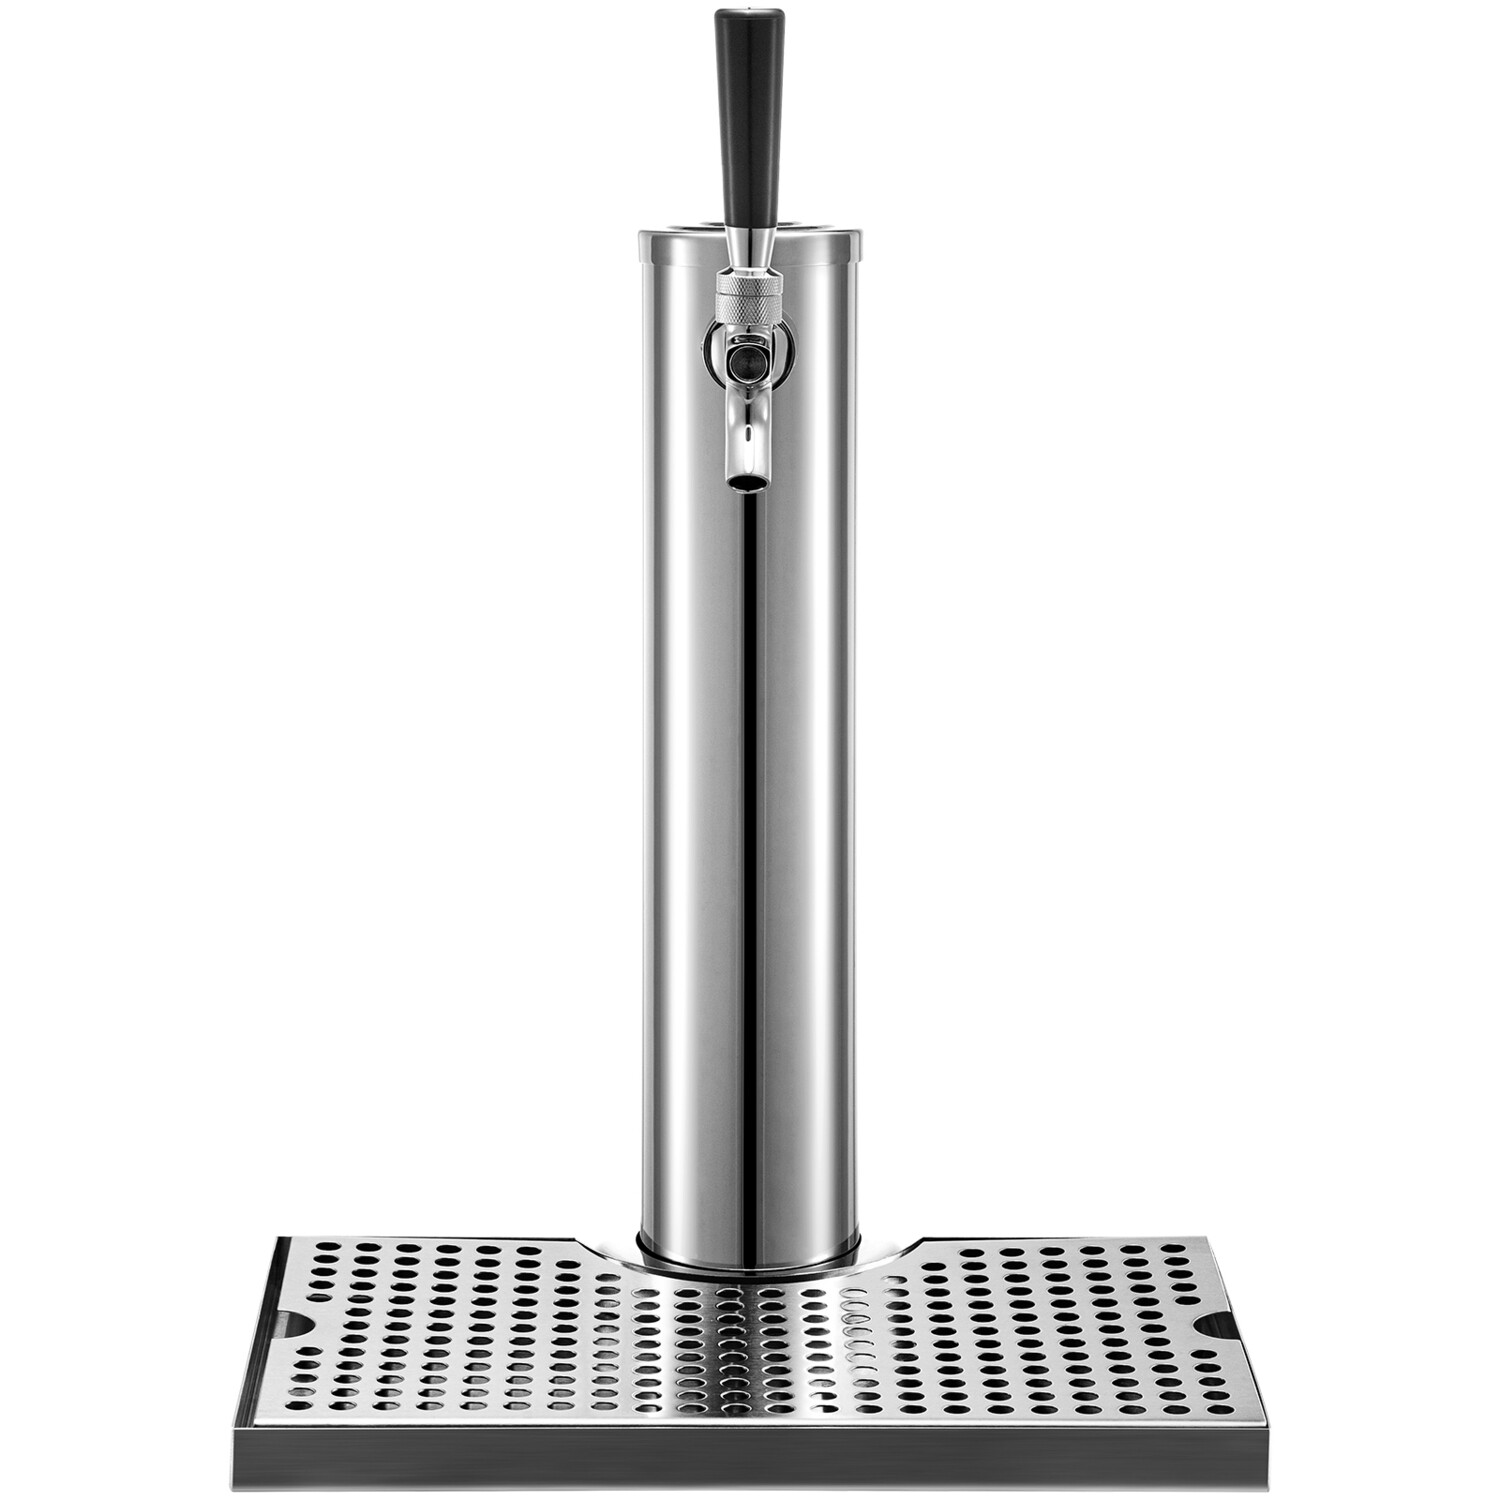 Stainless steel drip tray and beer tower kegerator tower one faucet